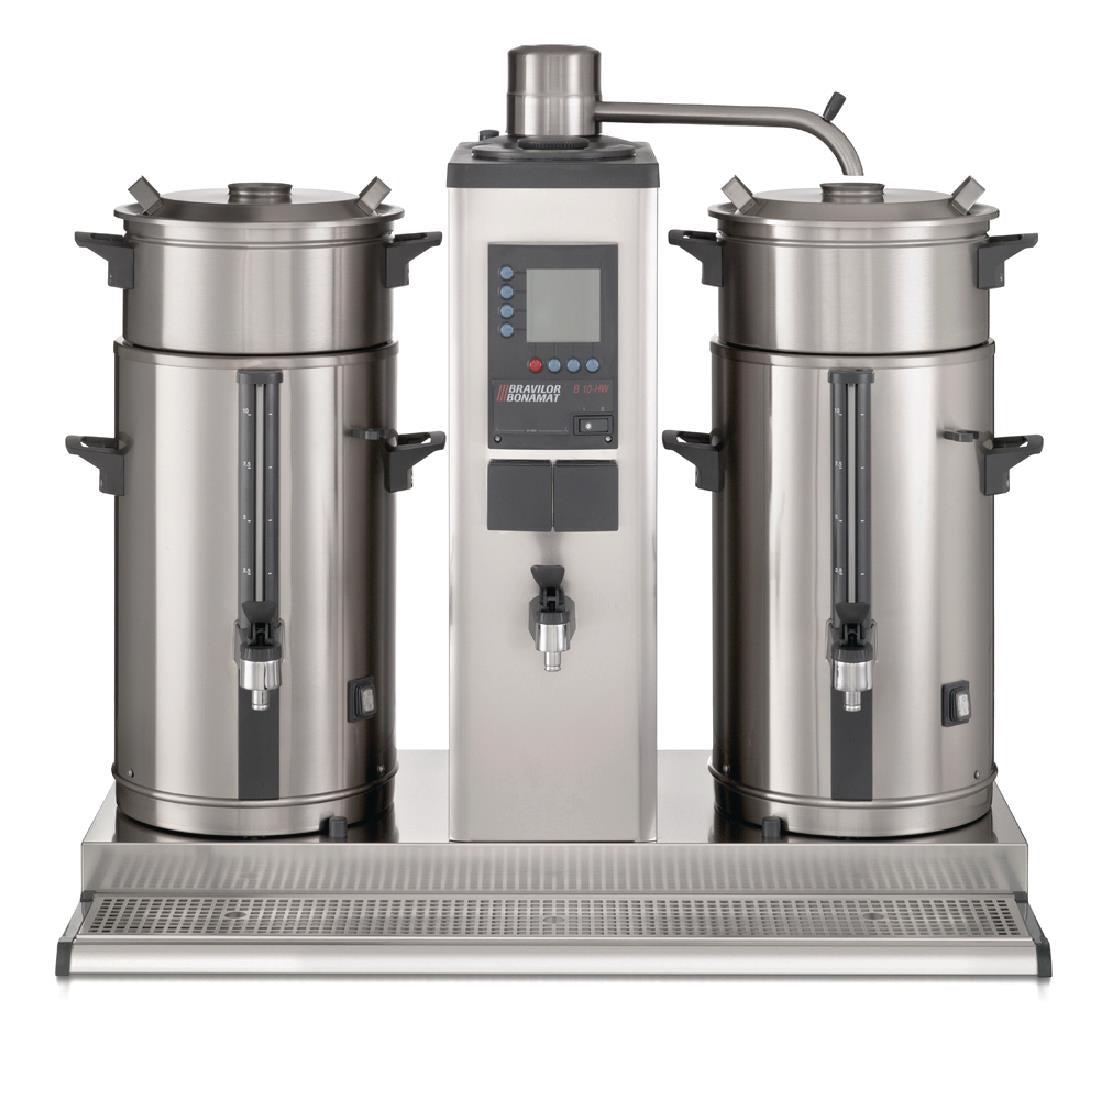 DC690-3P Bravilor B10 HW Bulk Coffee Brewer with 2x10Ltr Coffee Urns and Hot Water Tap 3 Phase JD Catering Equipment Solutions Ltd